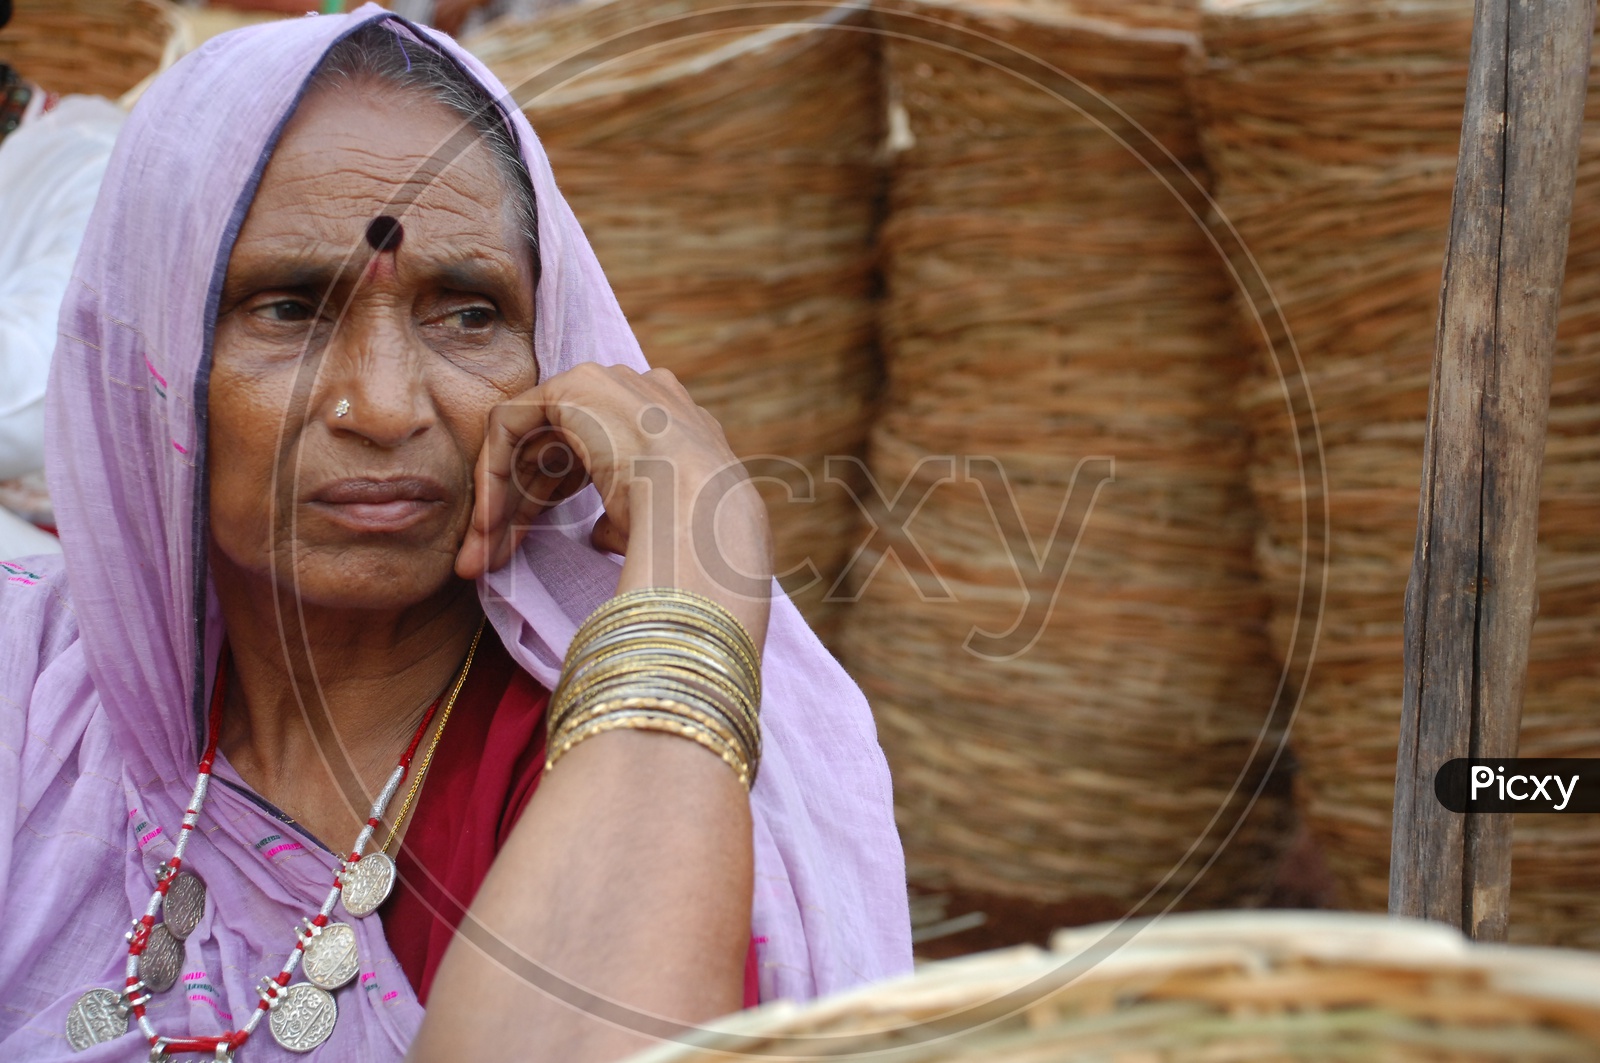 Indian woman with a distressed look